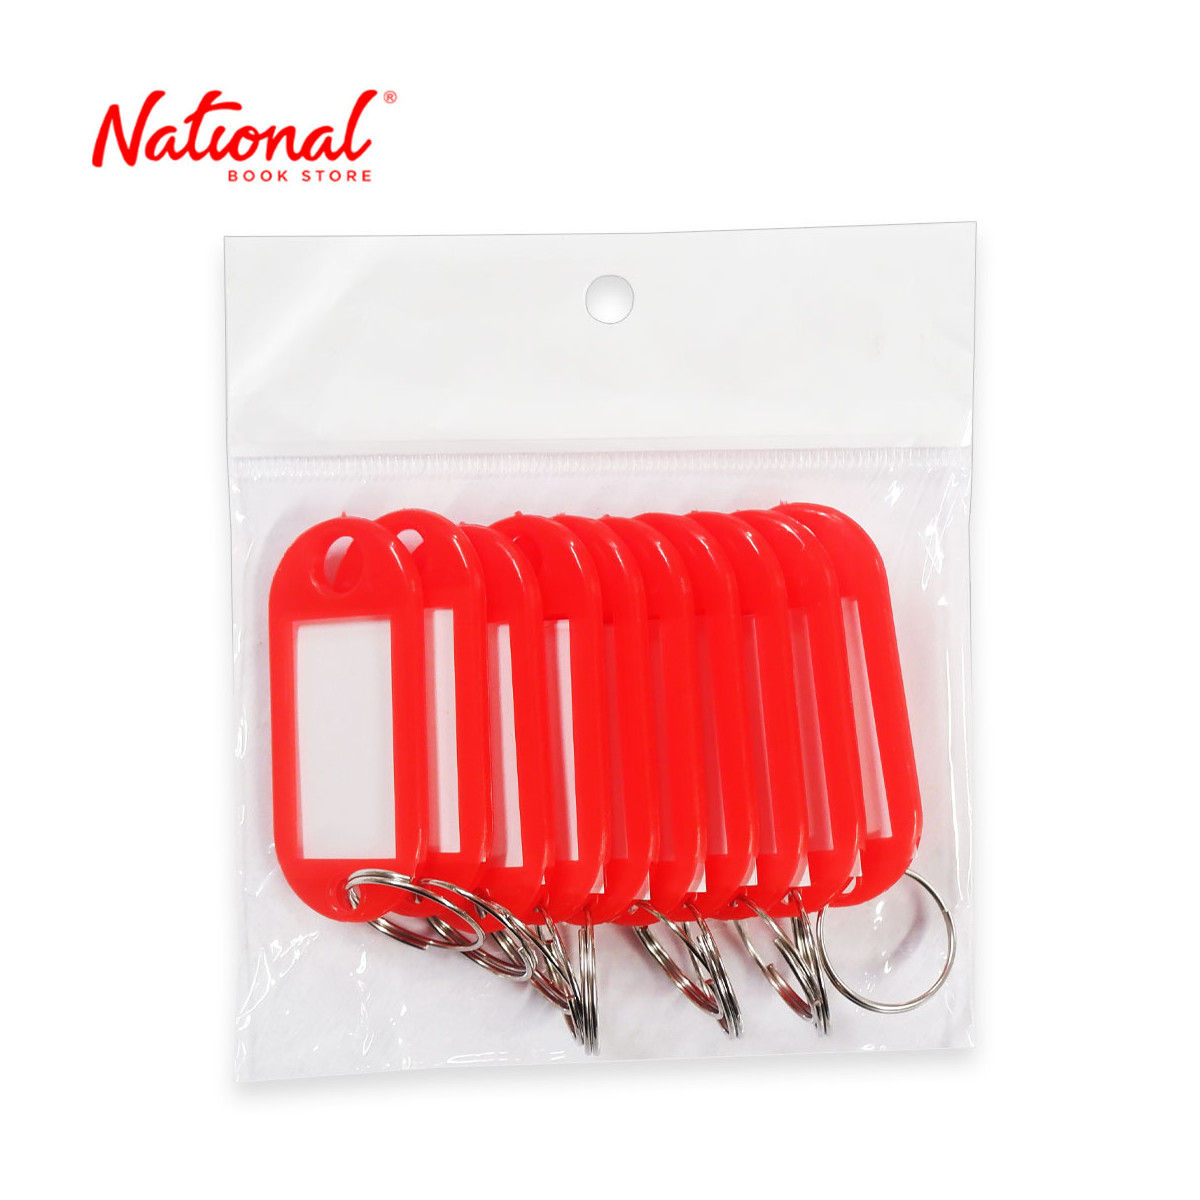 Tiger Key Tags 10 pieces Per Pack, Red - Home & Office Stationery - Filing Accessories